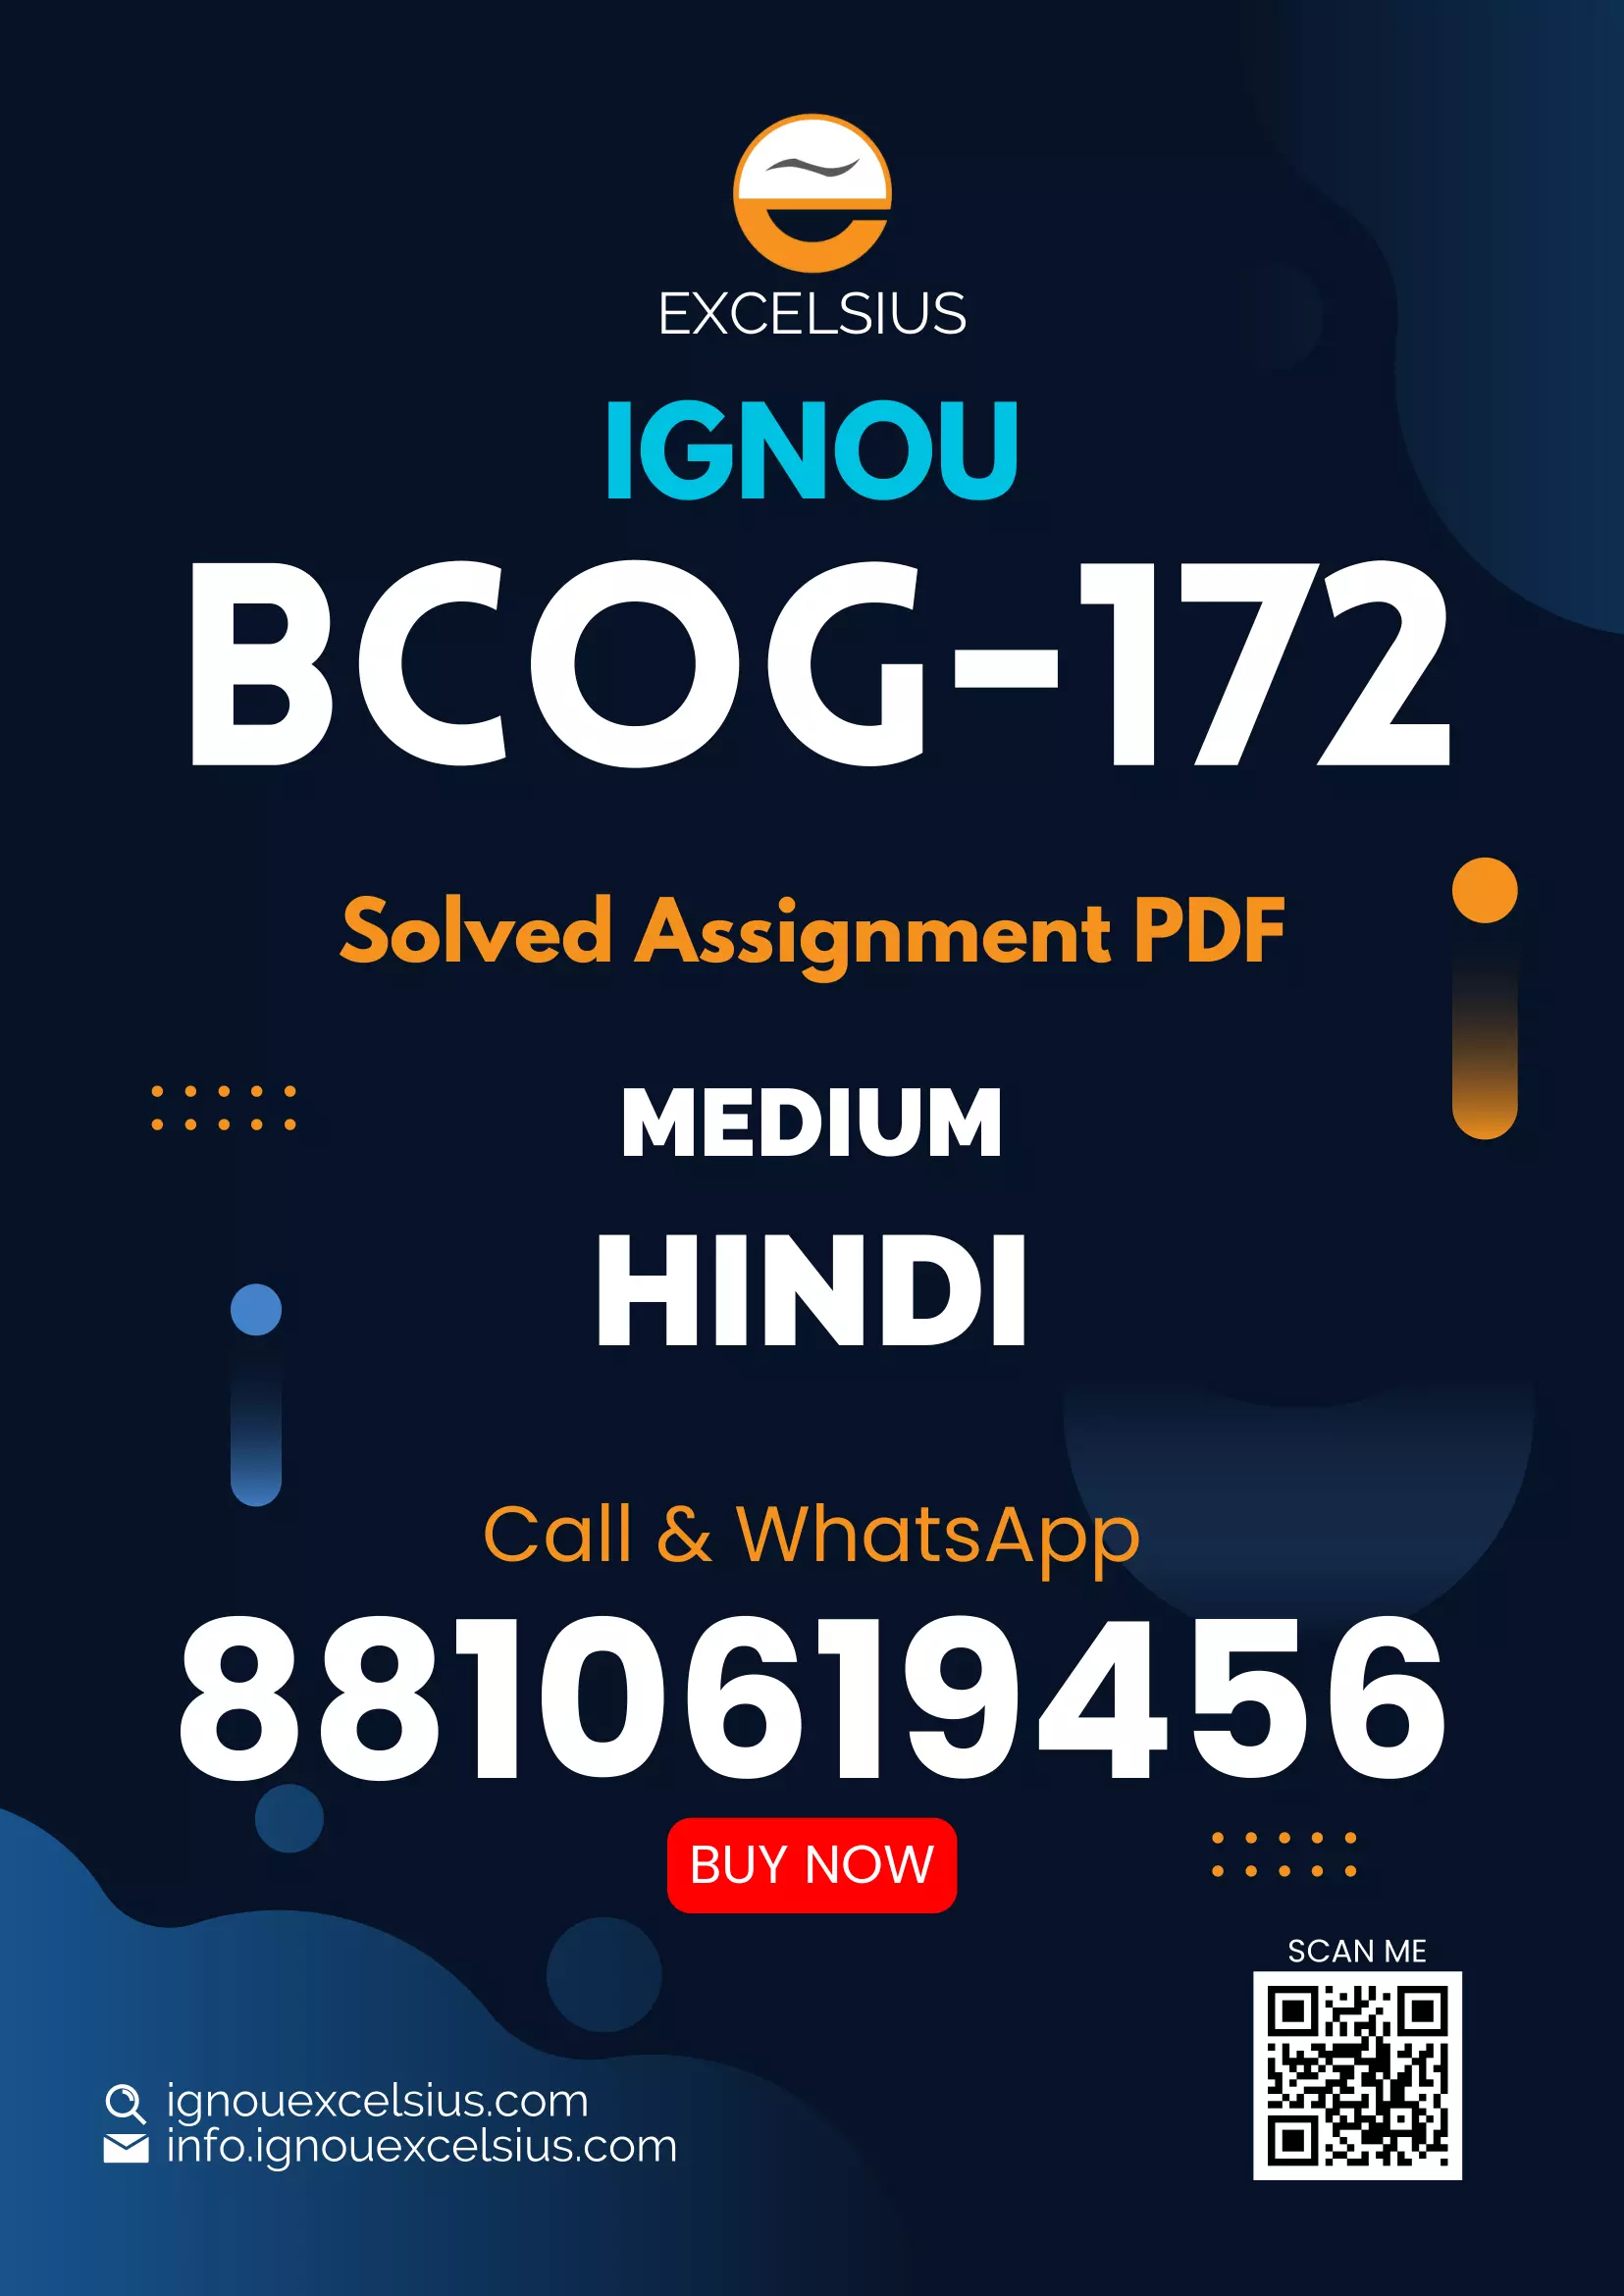 IGNOU BCOG-172 - Indian Economy, Latest Solved Assignment-January 2023 - December 2023